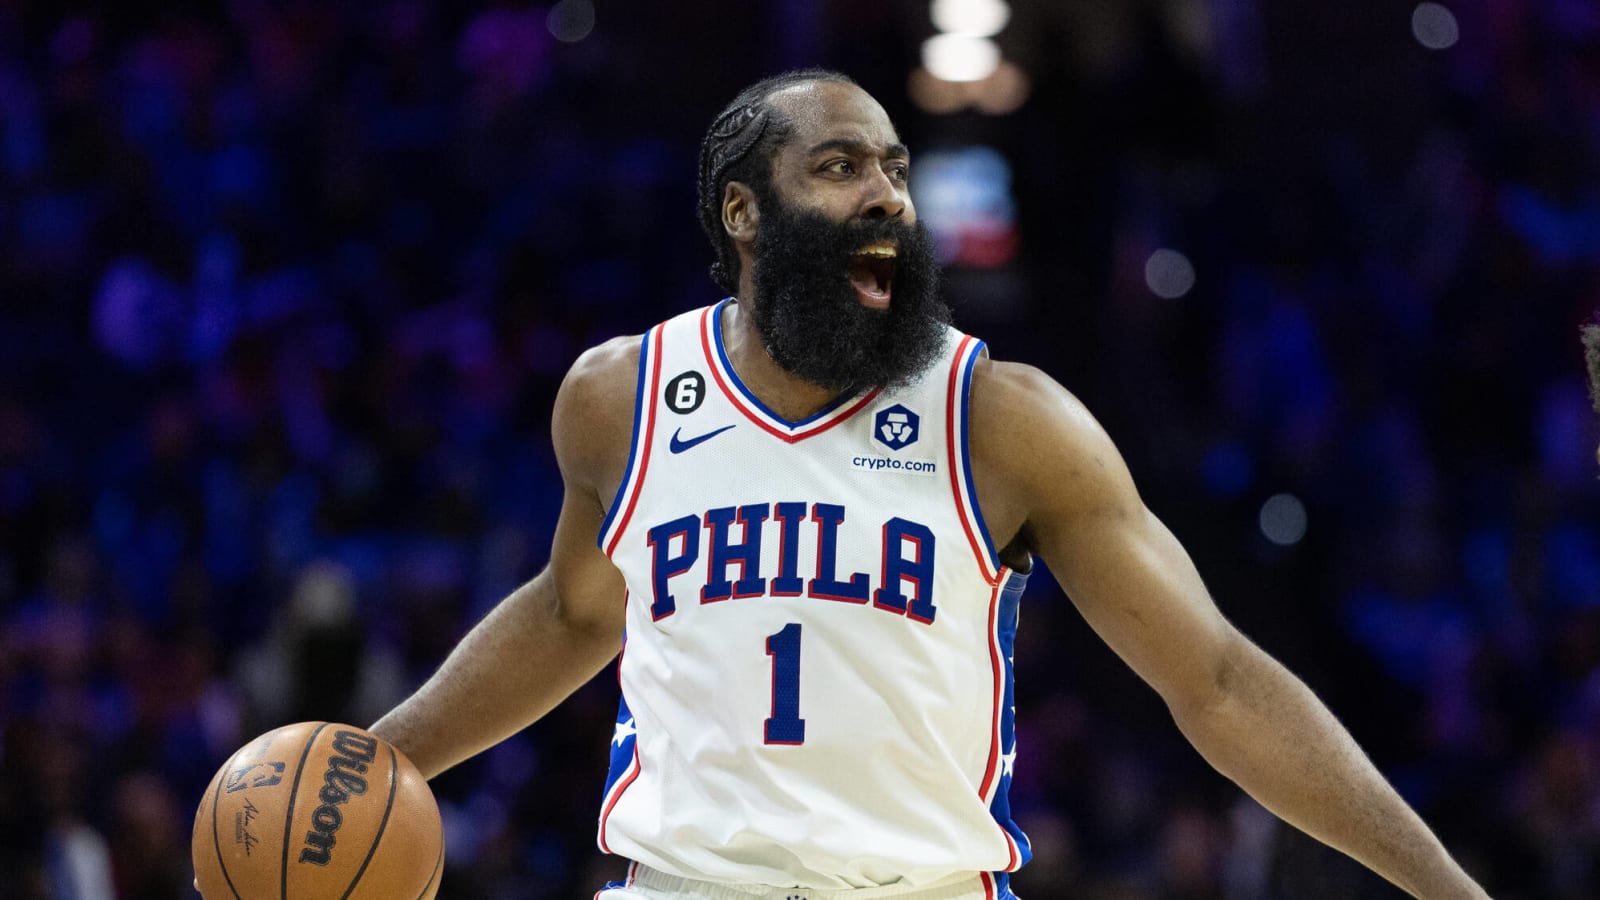 Speculation James Harden returns to Rockets growing